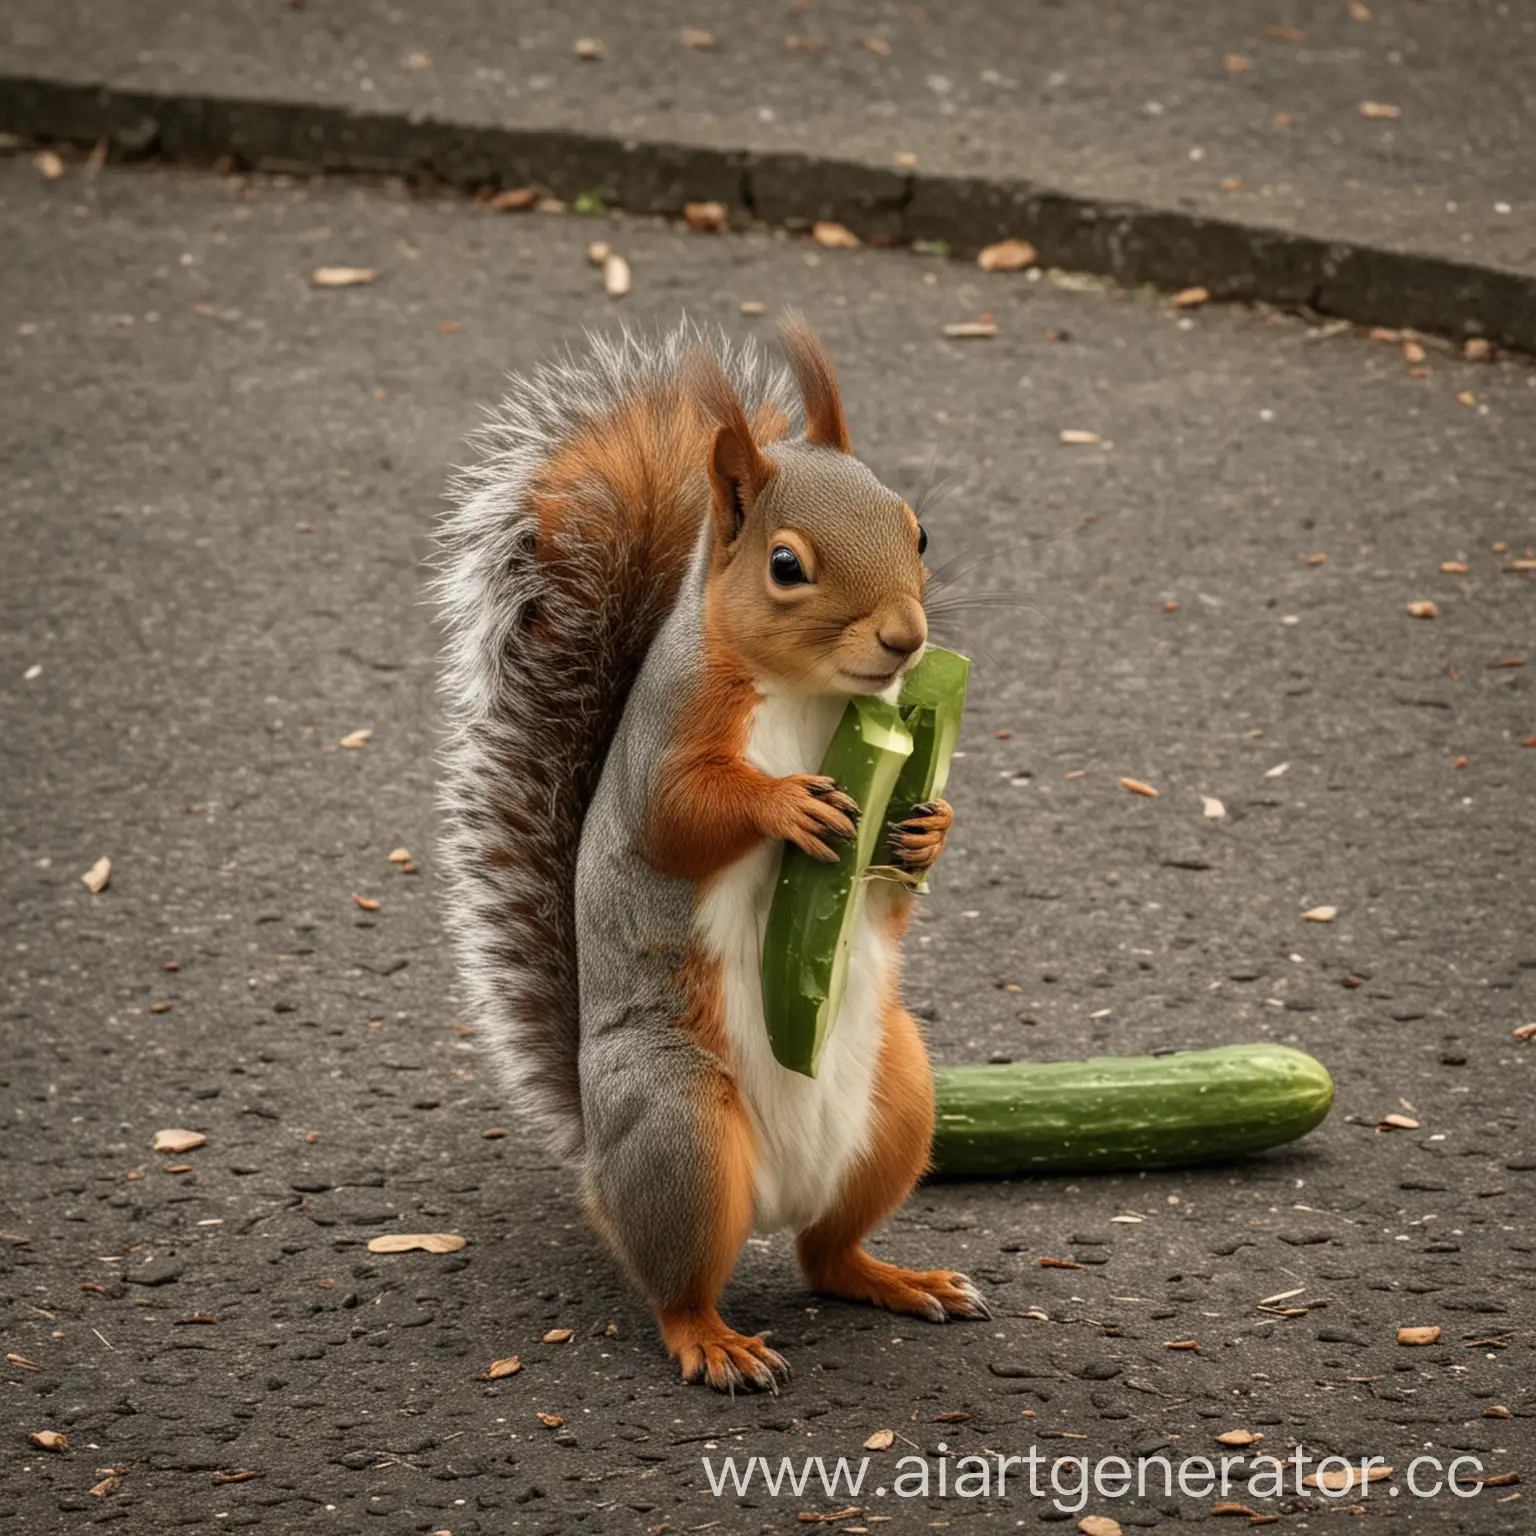 Busy-Squirrel-Starts-Its-Day-with-a-Fresh-Cucumber-Feeling